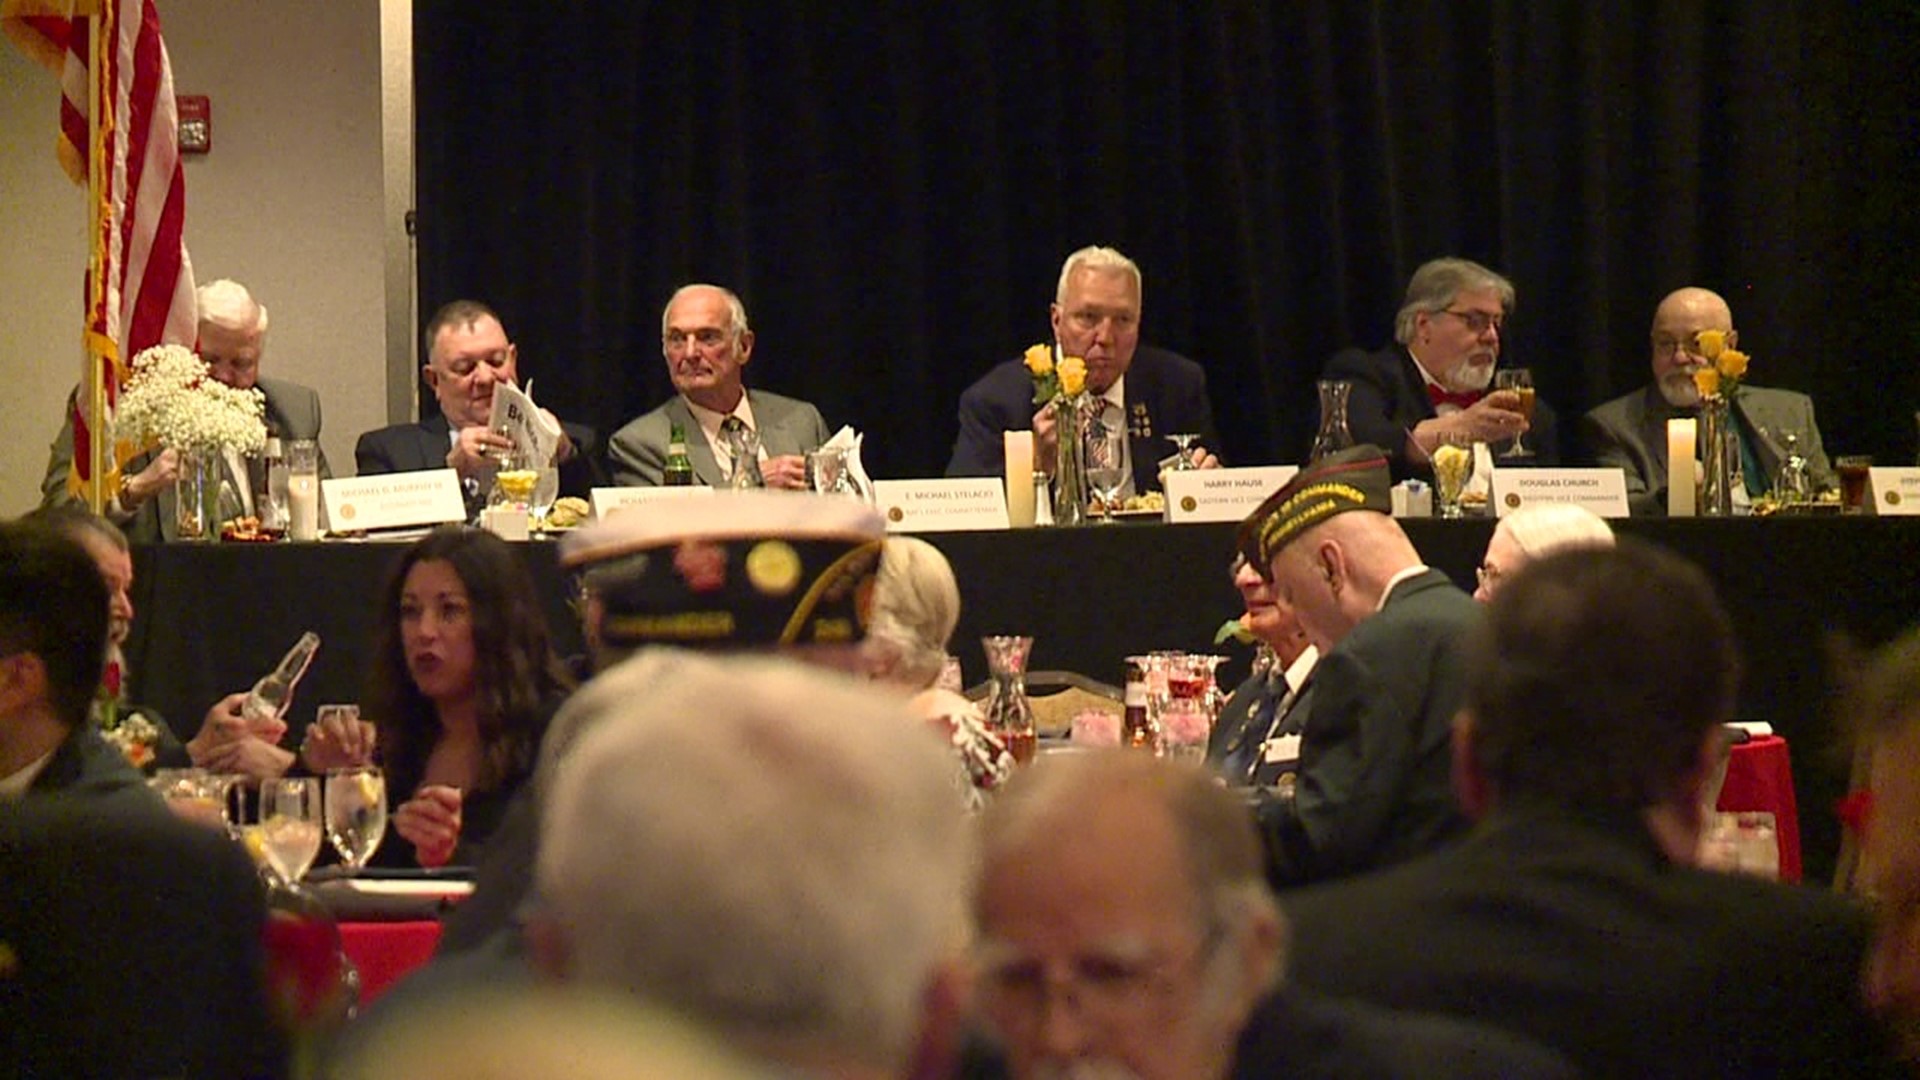 For the first time ever, the commander of the statewide American Legion, who is from Scranton, was joined by a second vice commander, also from Lackawanna County.